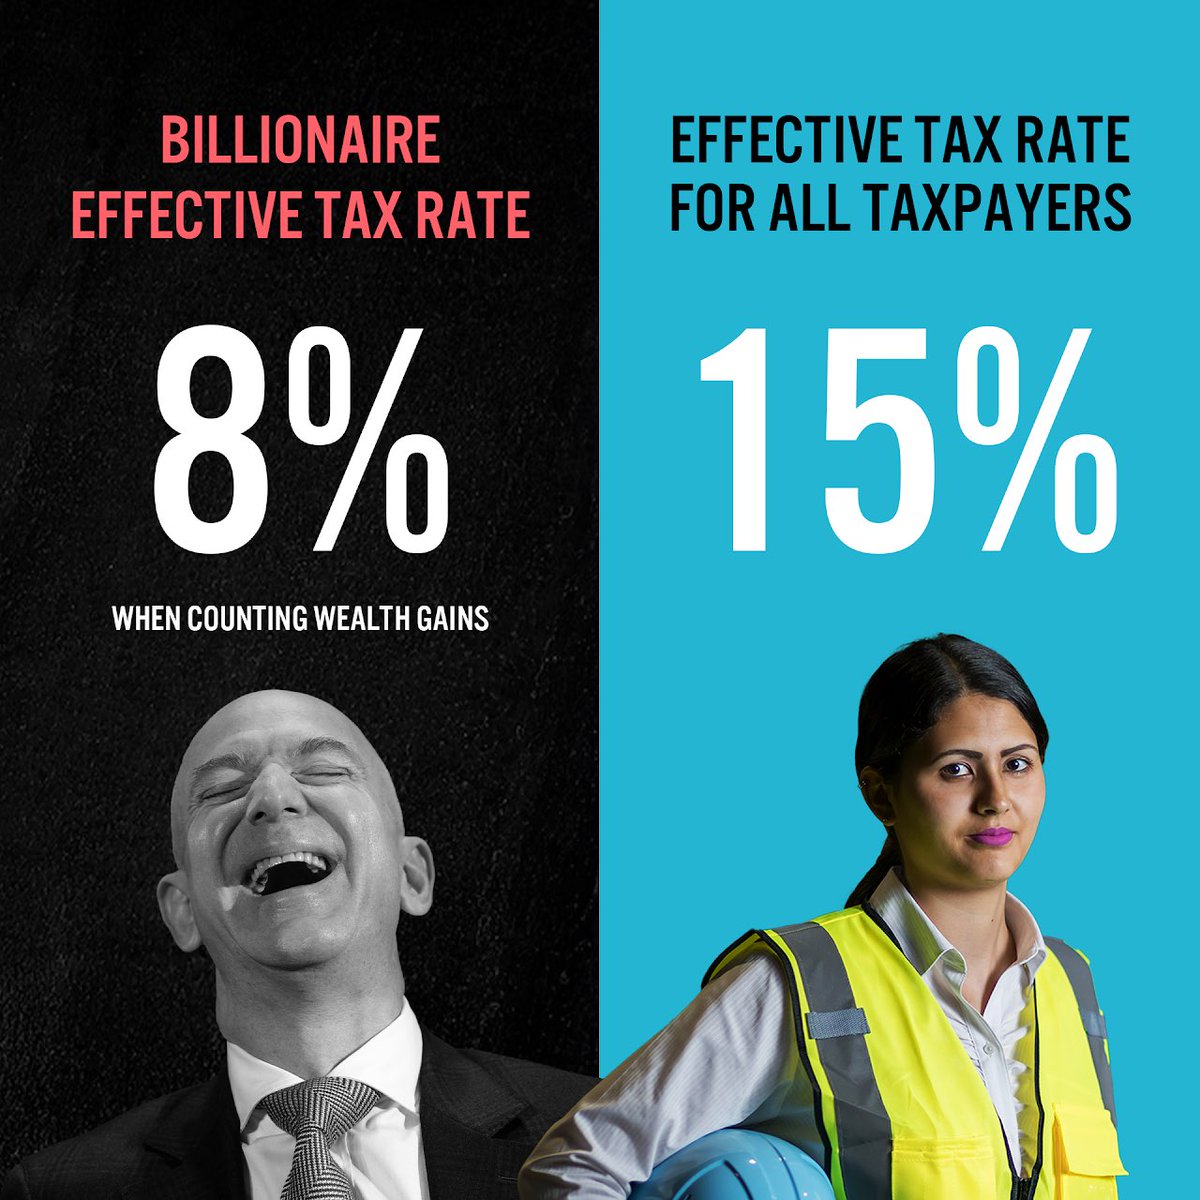 This #TaxDay, an important reminder: You pay a higher effective tax rate than billionaires. Make it make sense. #UnionsForAll